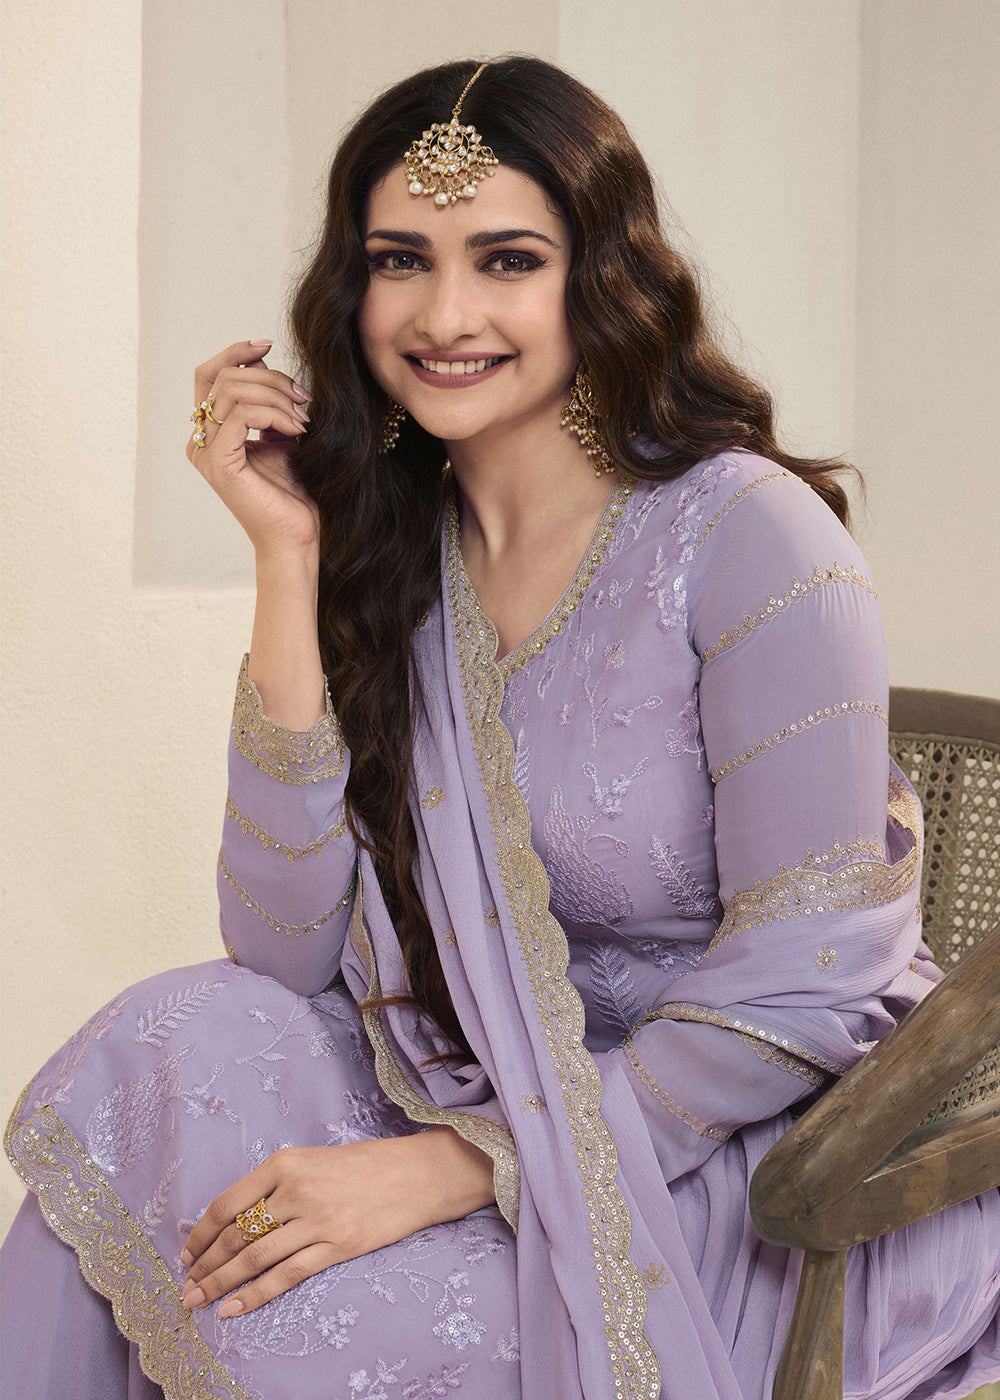 Shop Now Prachi Desai Lavender Organza Embroidered Sharara Suit Online at Empress Clothing in USA, UK, Canada, Italy & Worldwide. 